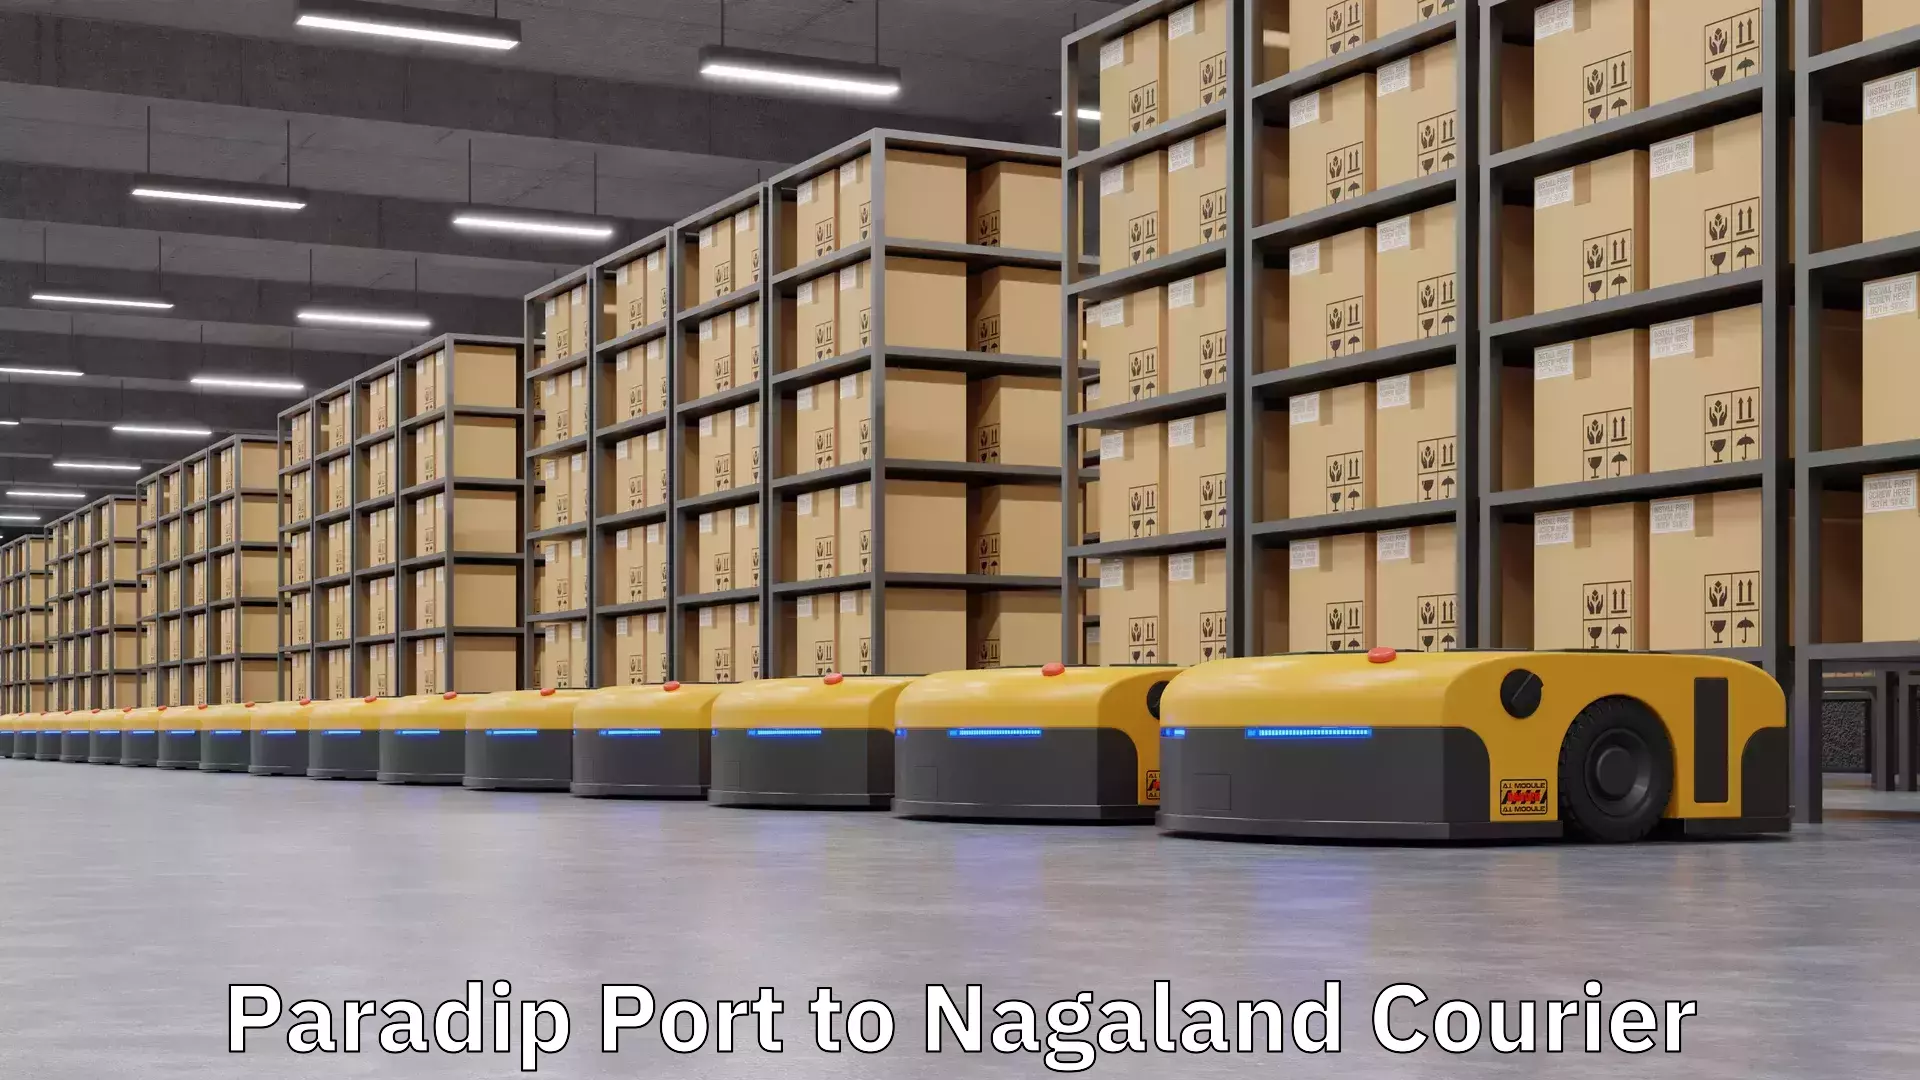 Global shipping networks in Paradip Port to Nagaland